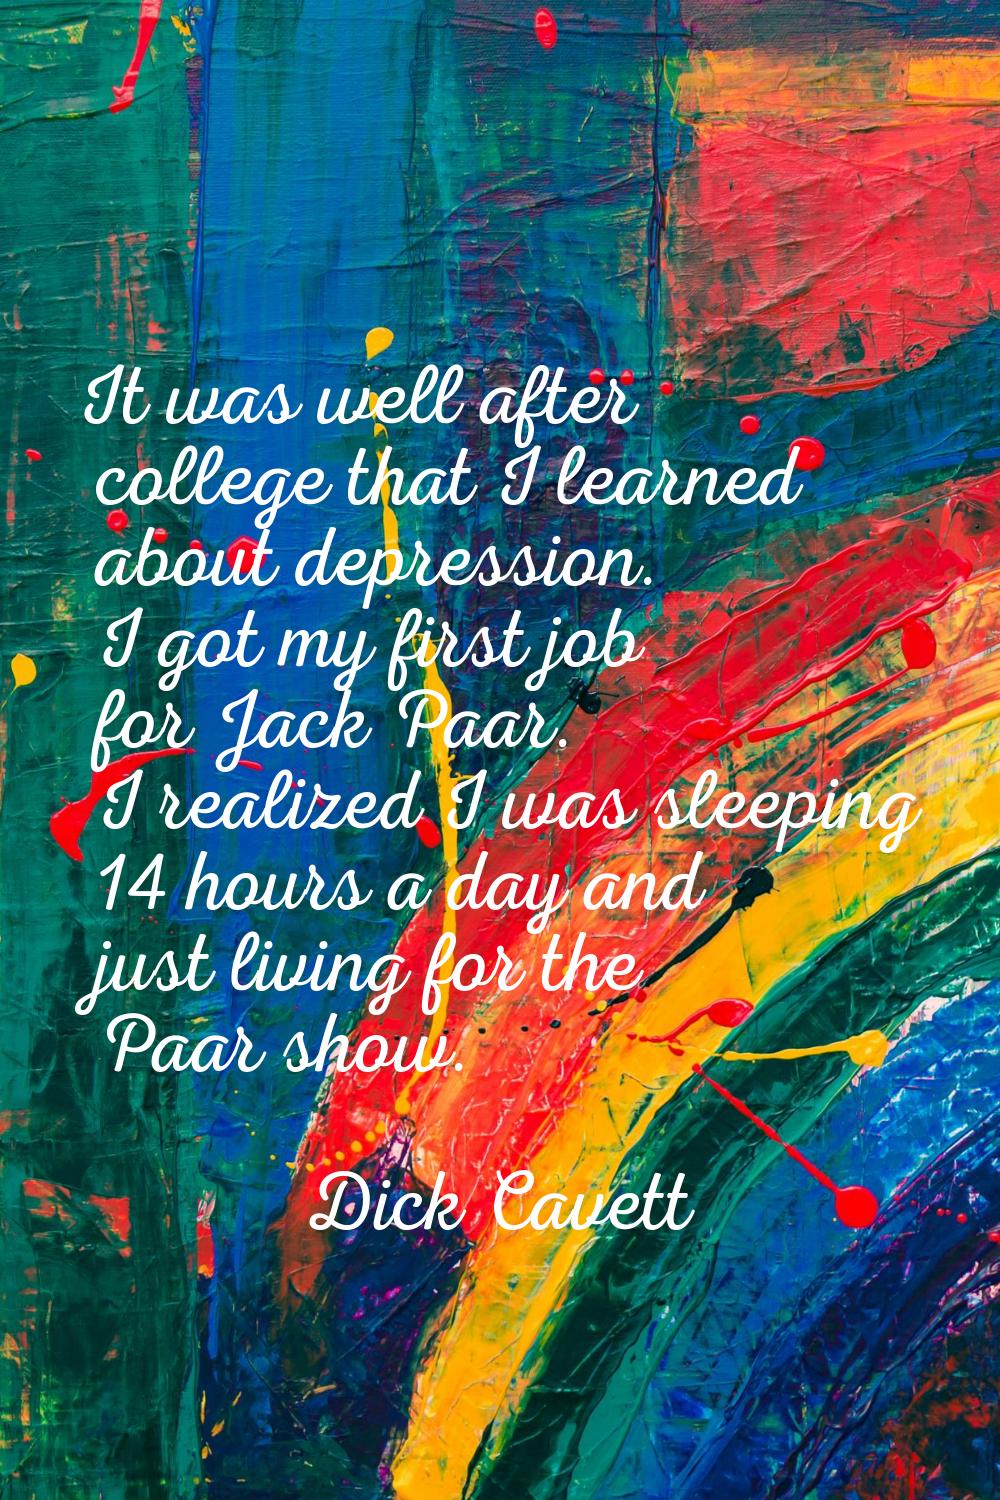 It was well after college that I learned about depression. I got my first job for Jack Paar. I real